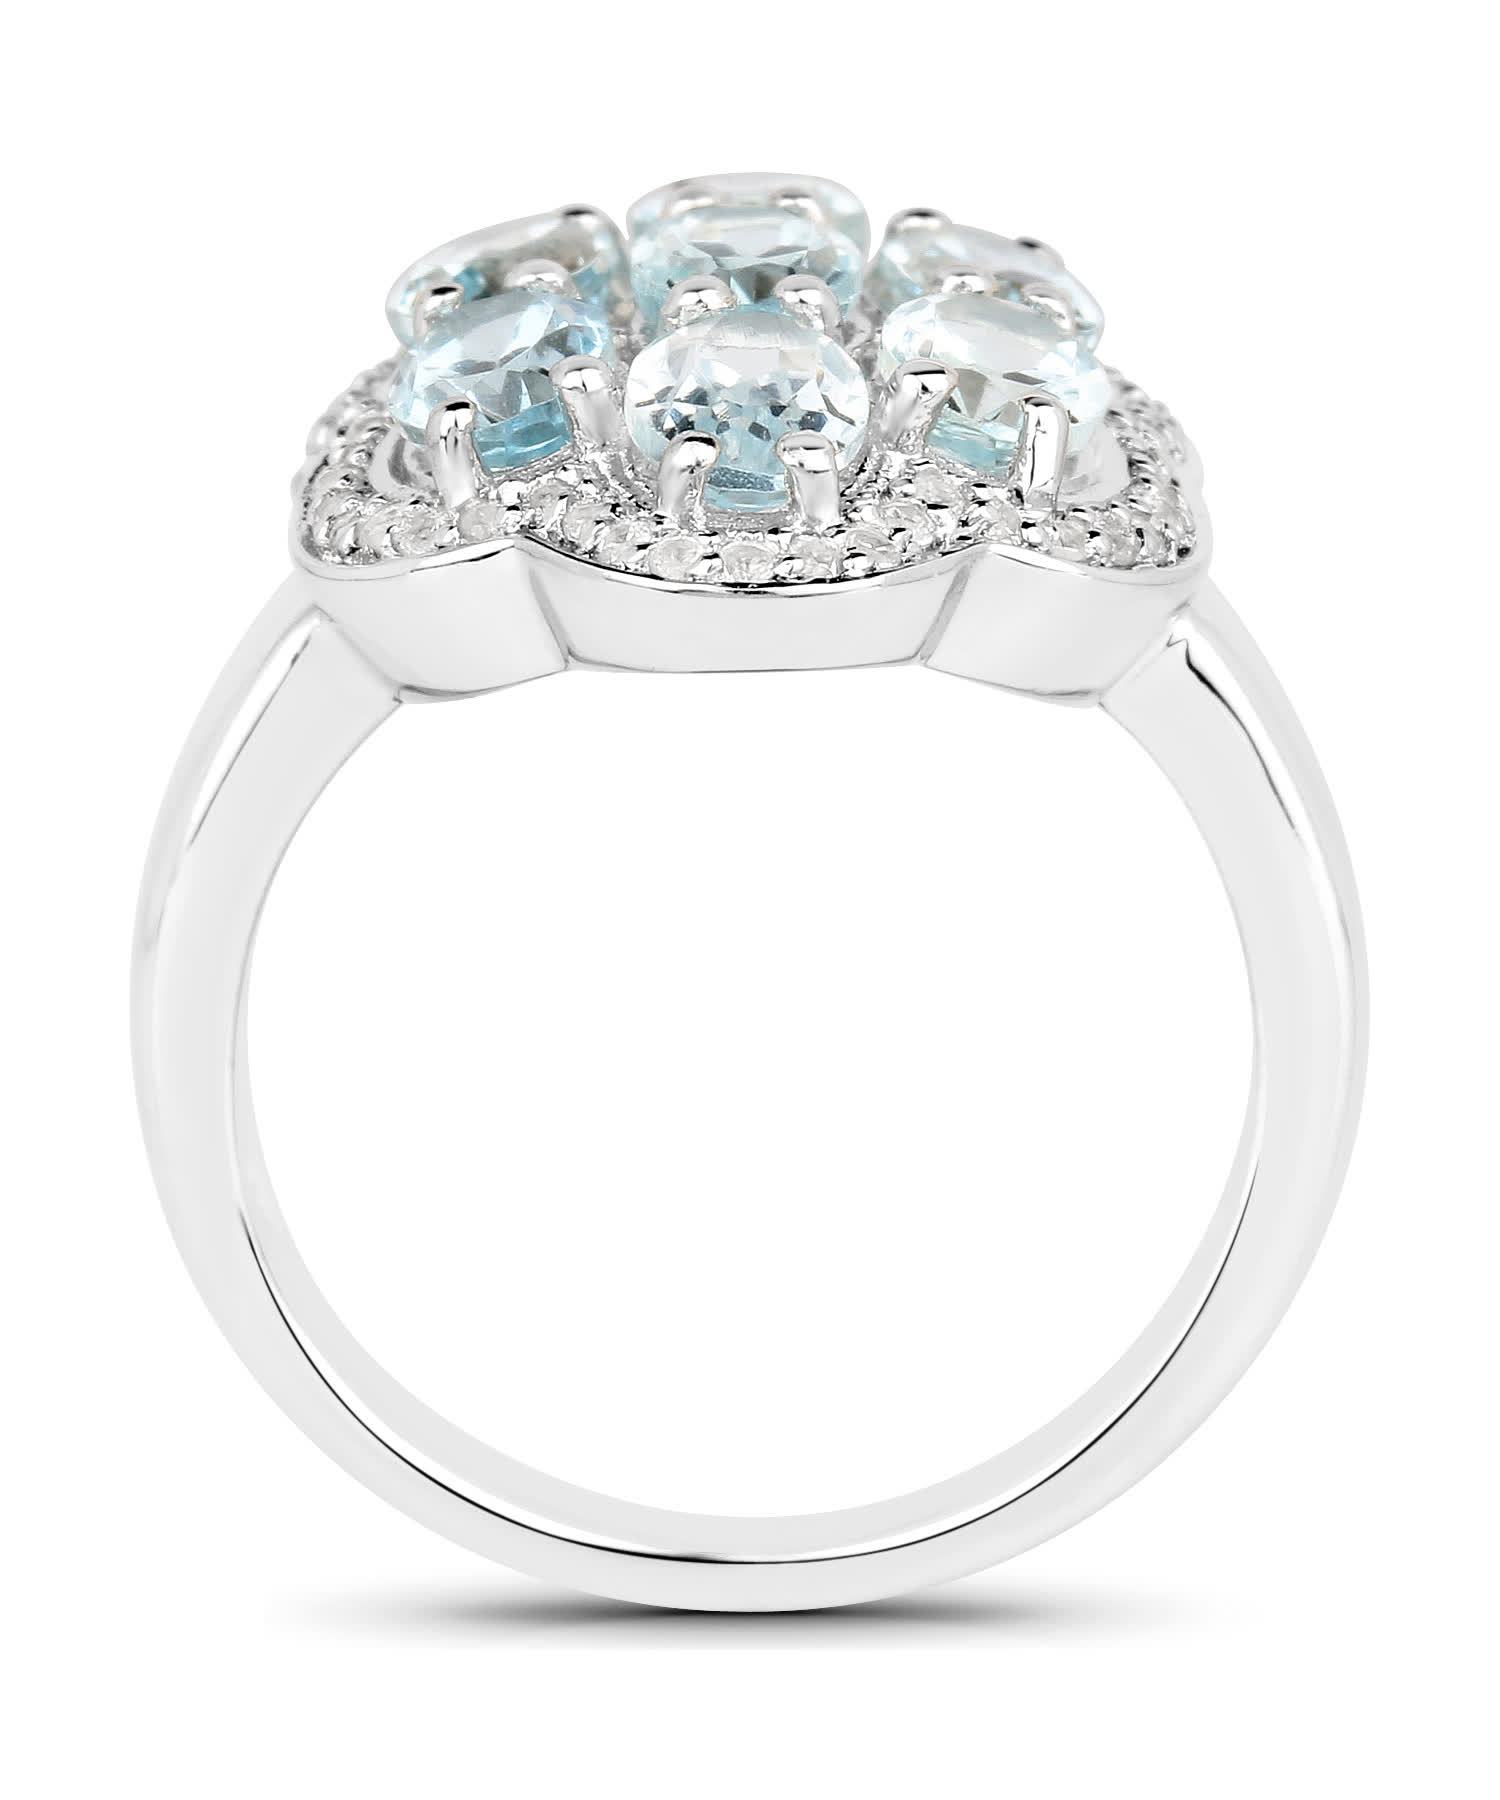 3.09ctw Natural Icy Sky Blue Aquamarine and Zircon Rhodium Plated 925 Sterling Silver Cocktail Ring View 2